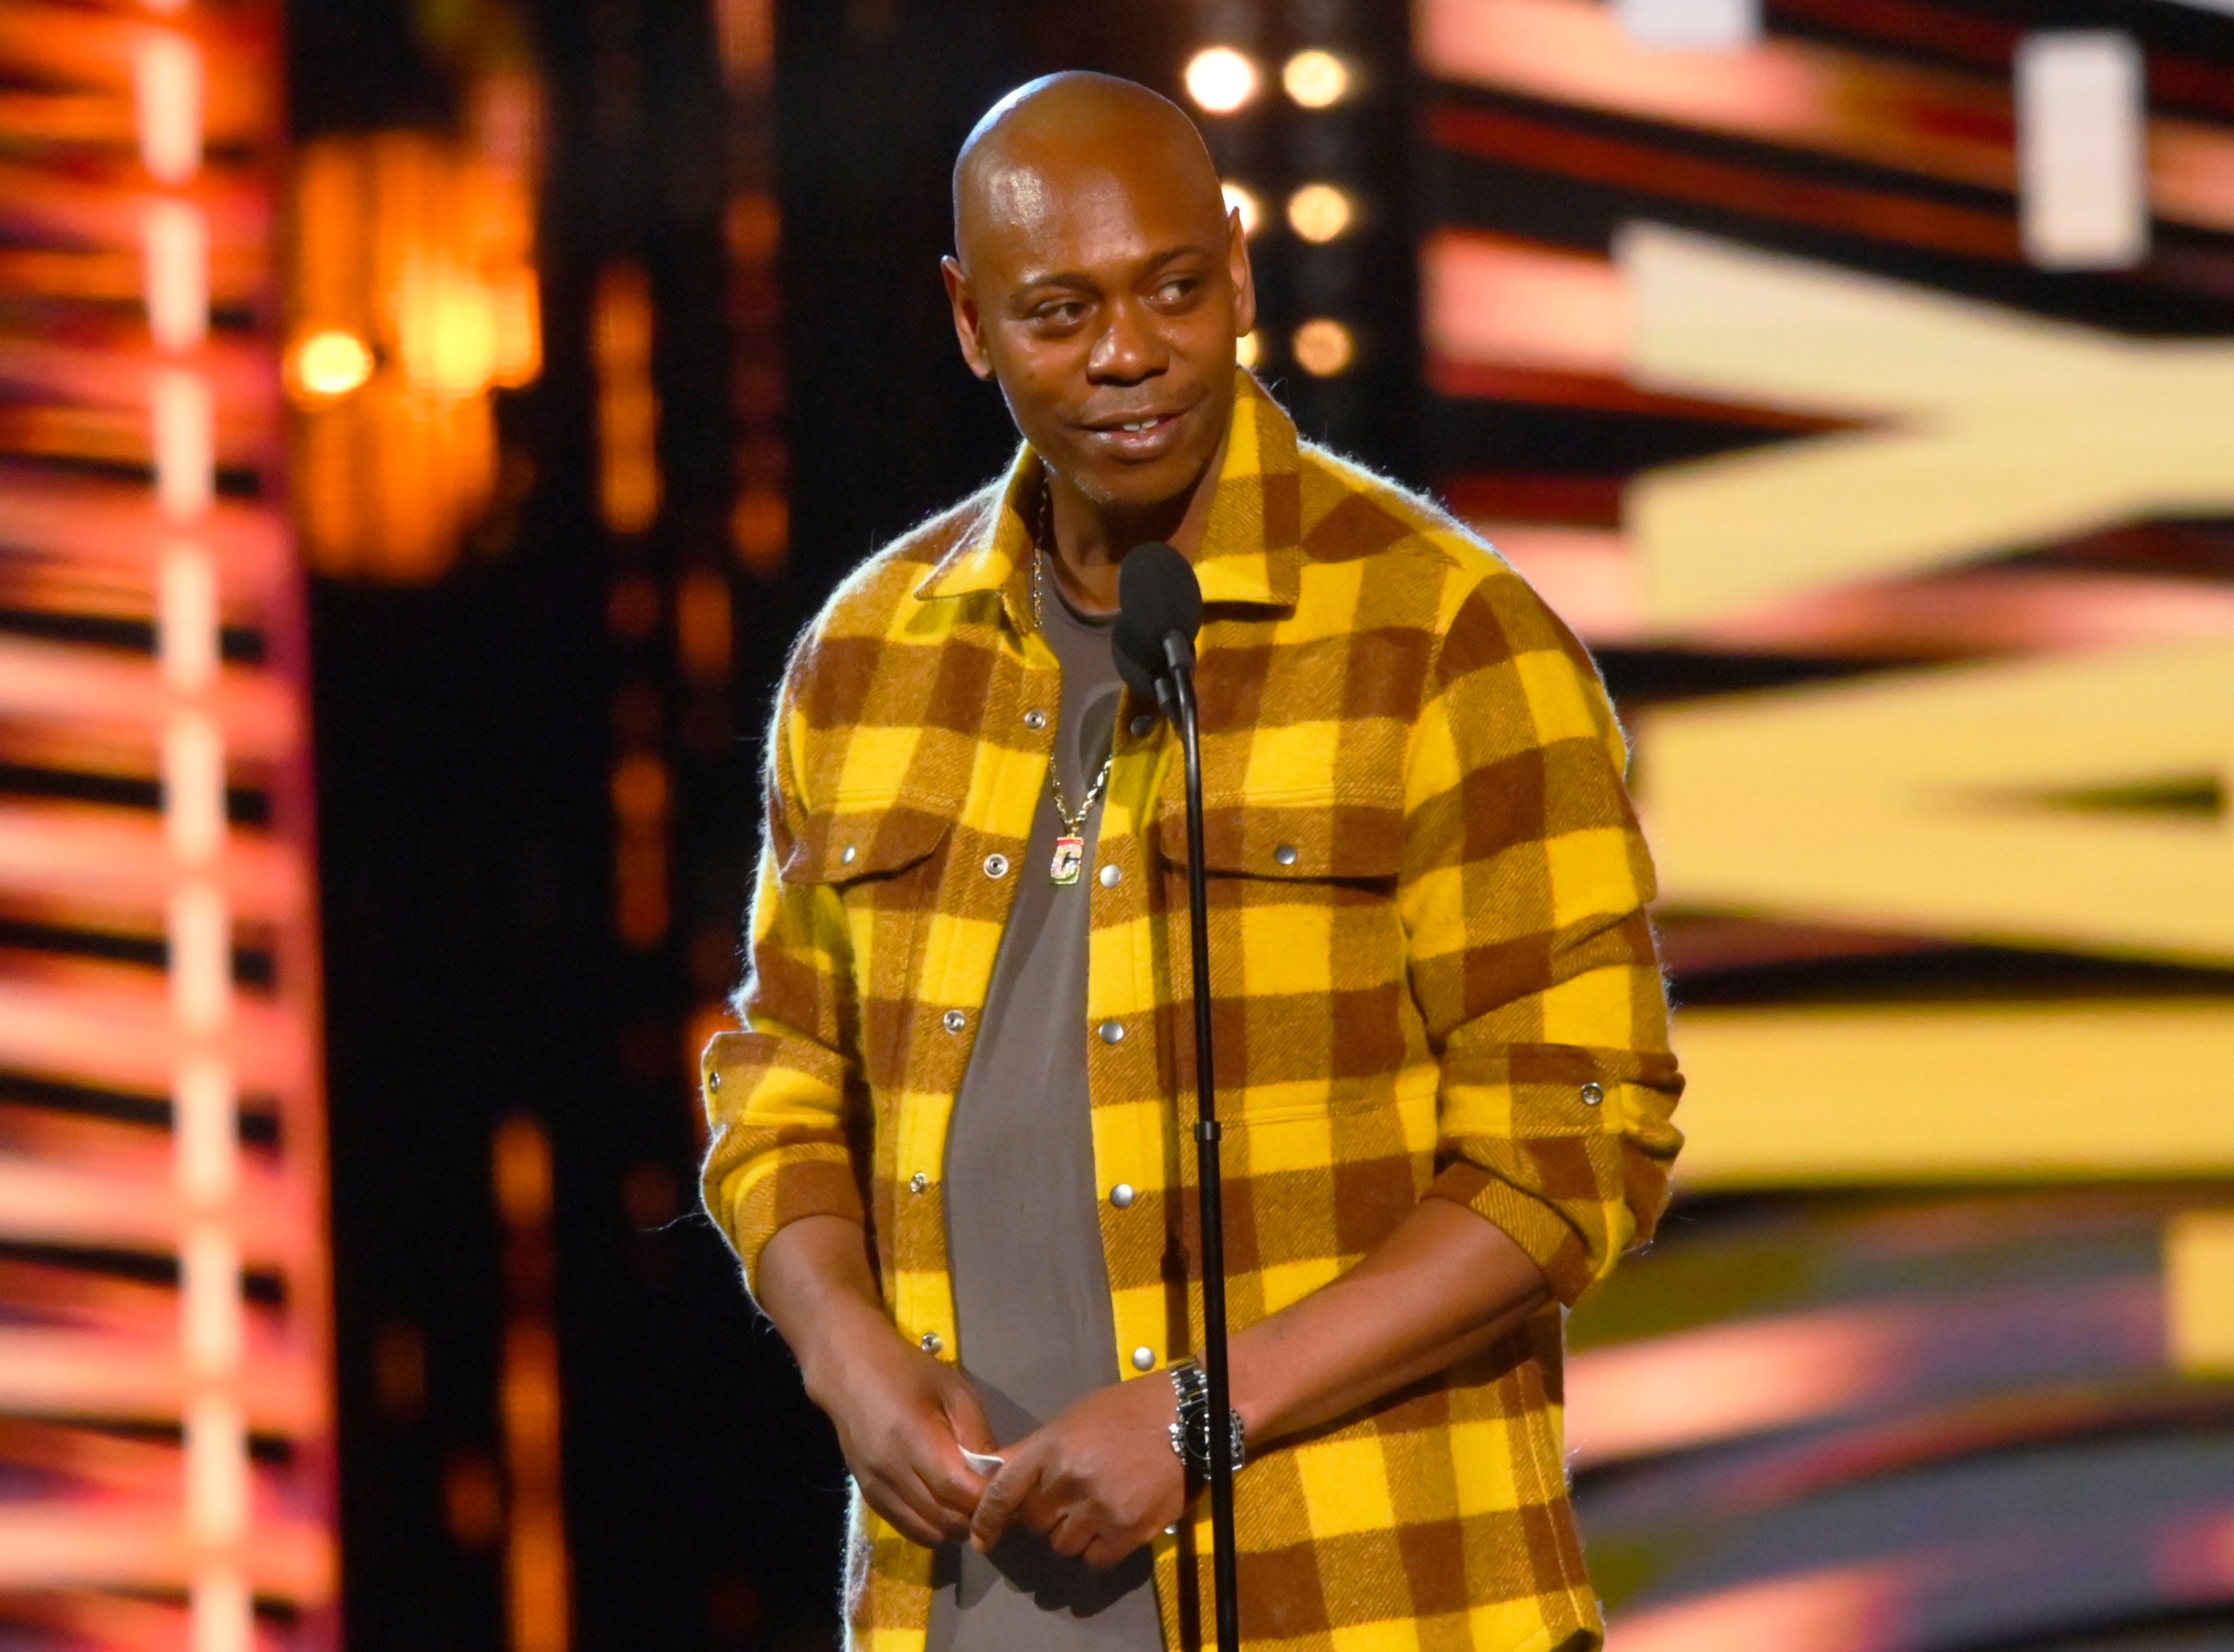 Dave Chappelle’s show at Minneapolis venue First Avenue was canceled following an online outcry